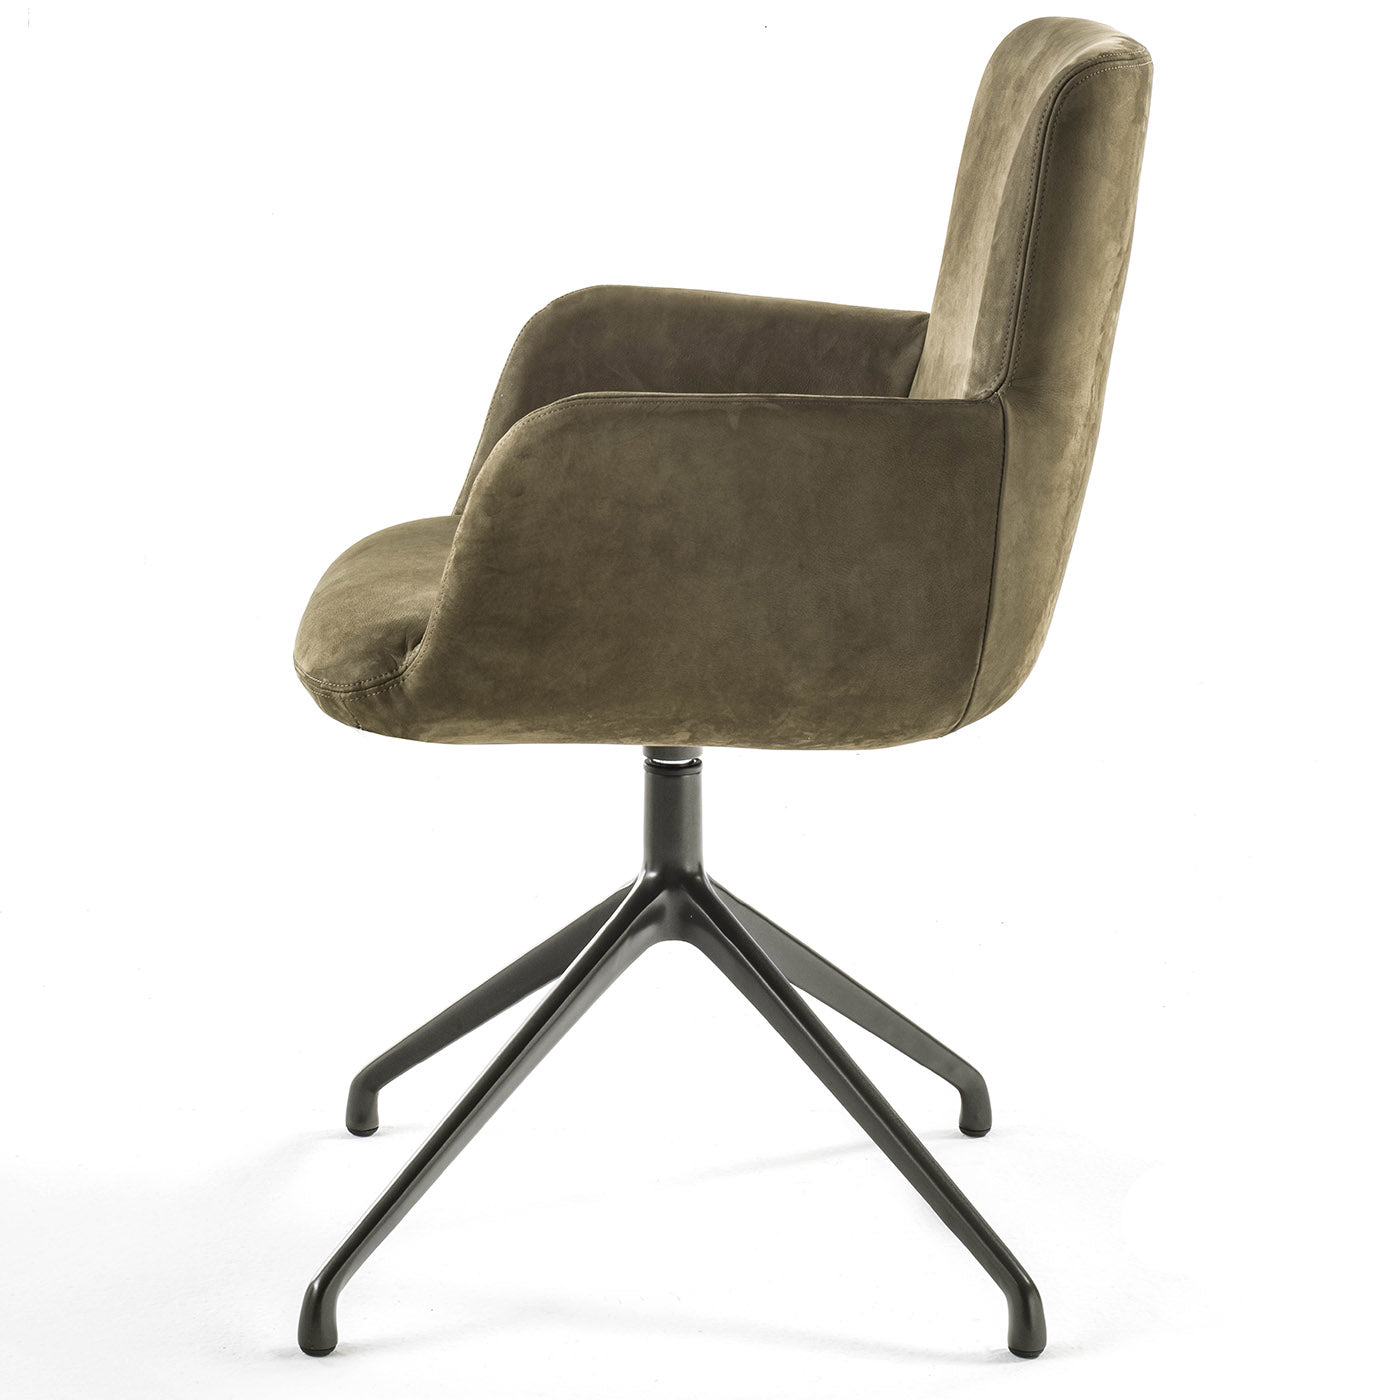 Materia Soft Swivel Sage-Green Chair With Armrests by Claudio Bellini - Alternative view 3